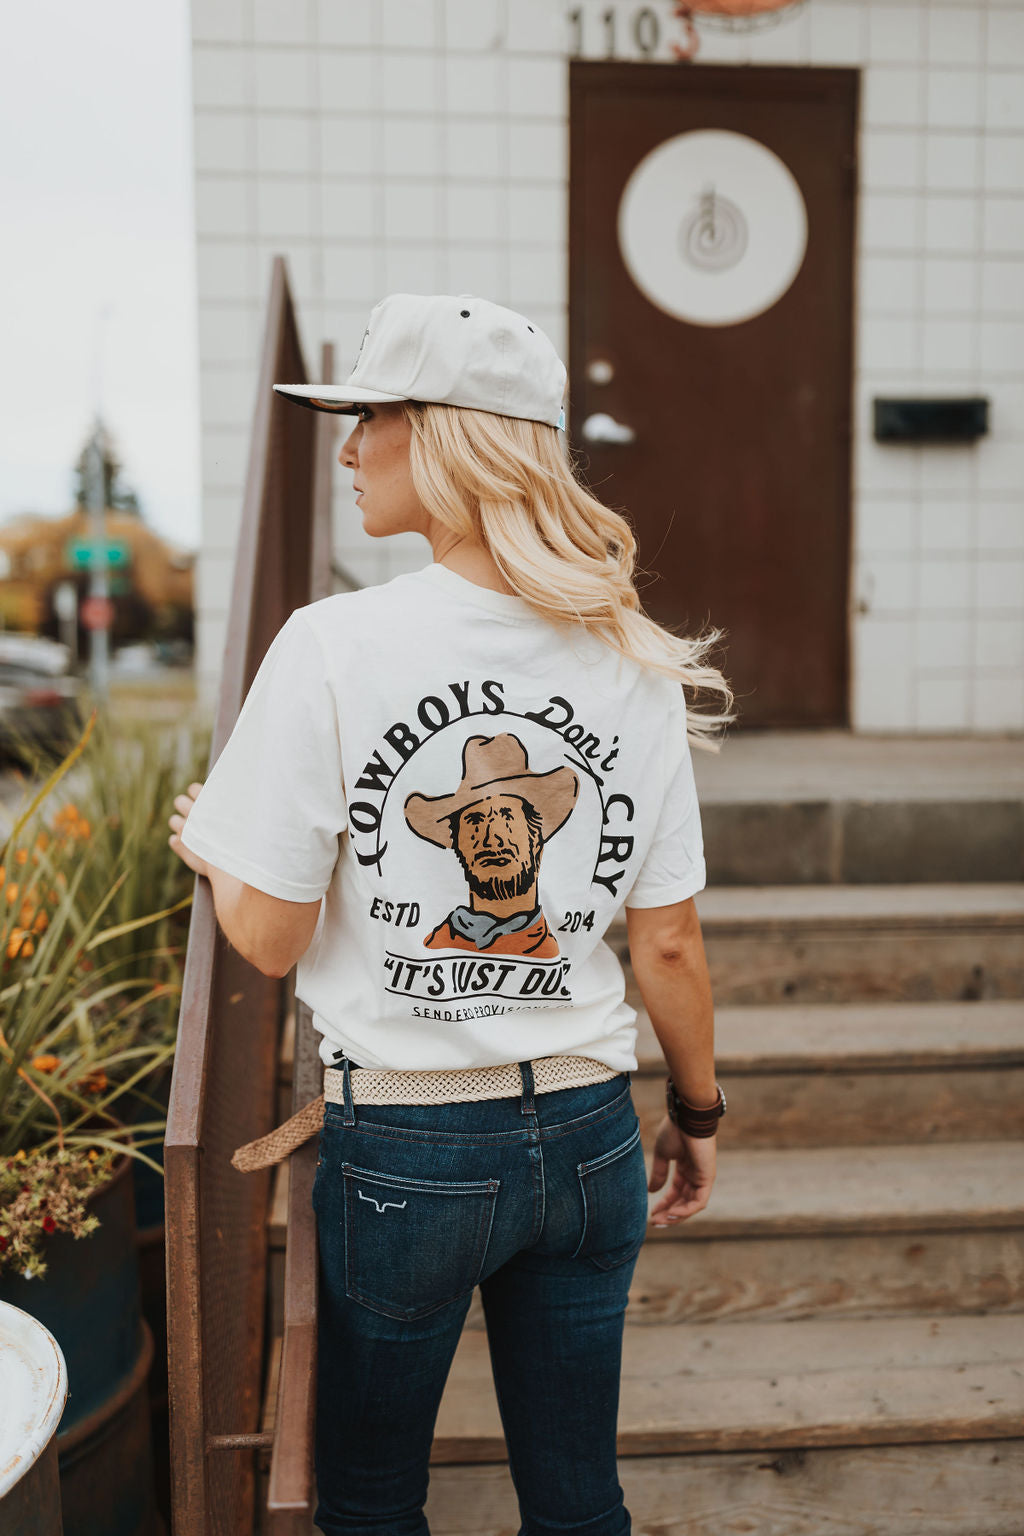 Cowboys Don't Cry Tee - Cody and Sioux